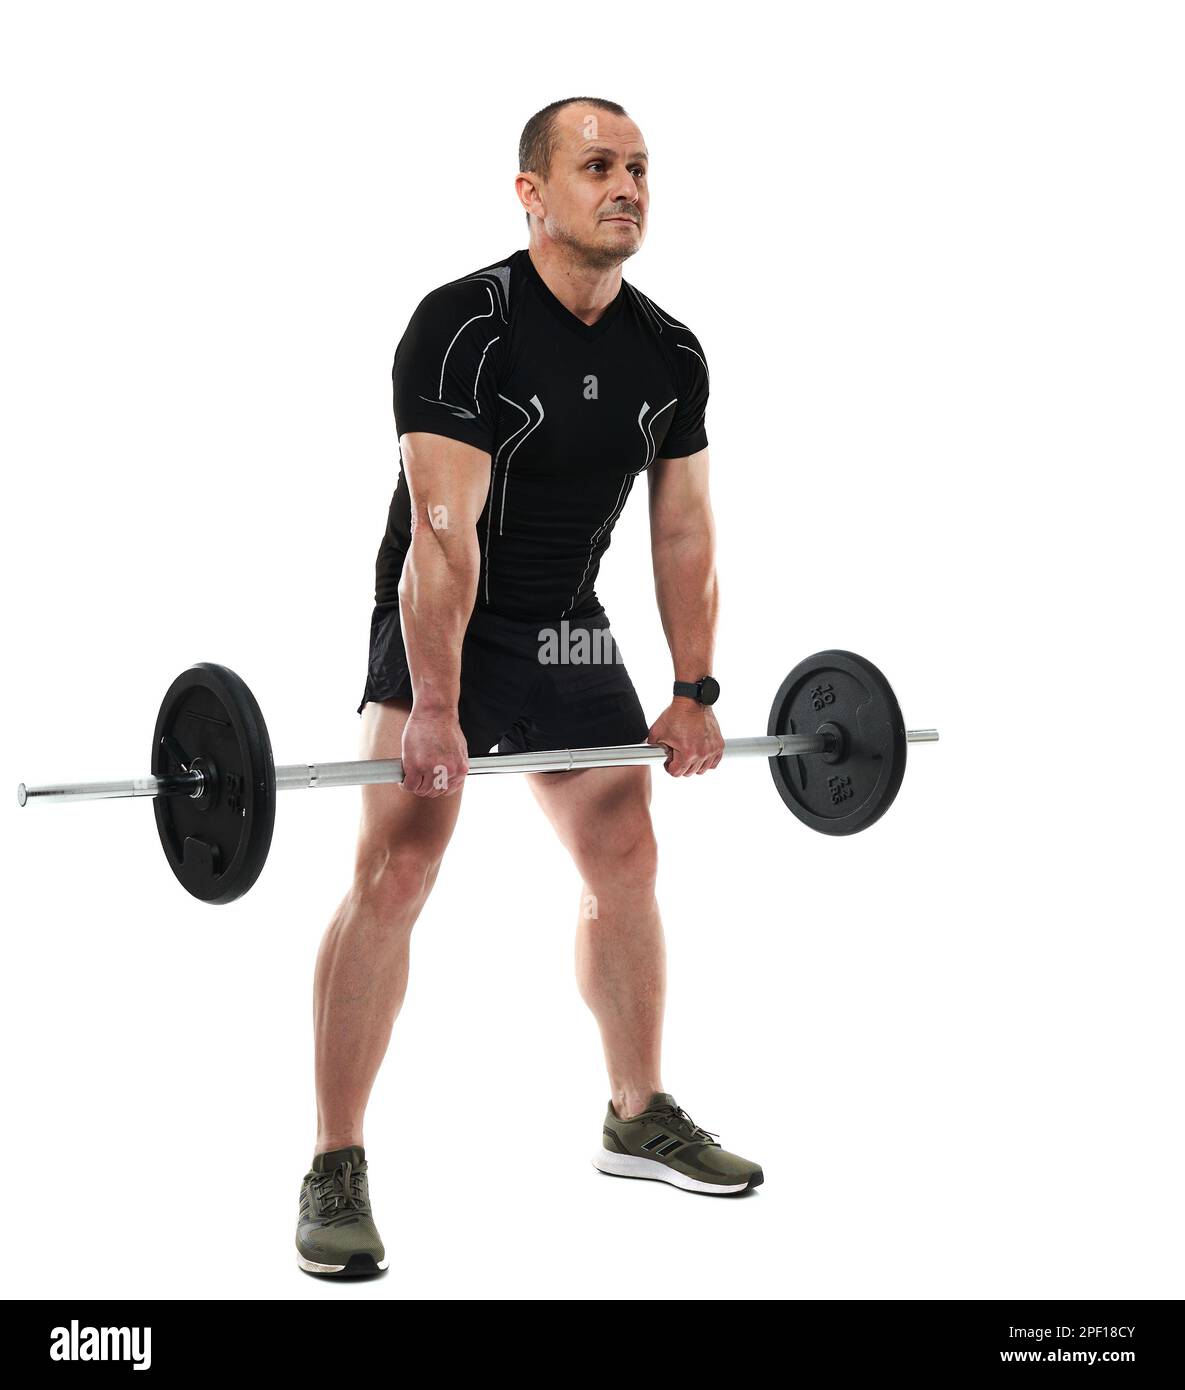 Athletic middle age man doing deadlift fitness workout with barbell, isolated on white background Stock Photo